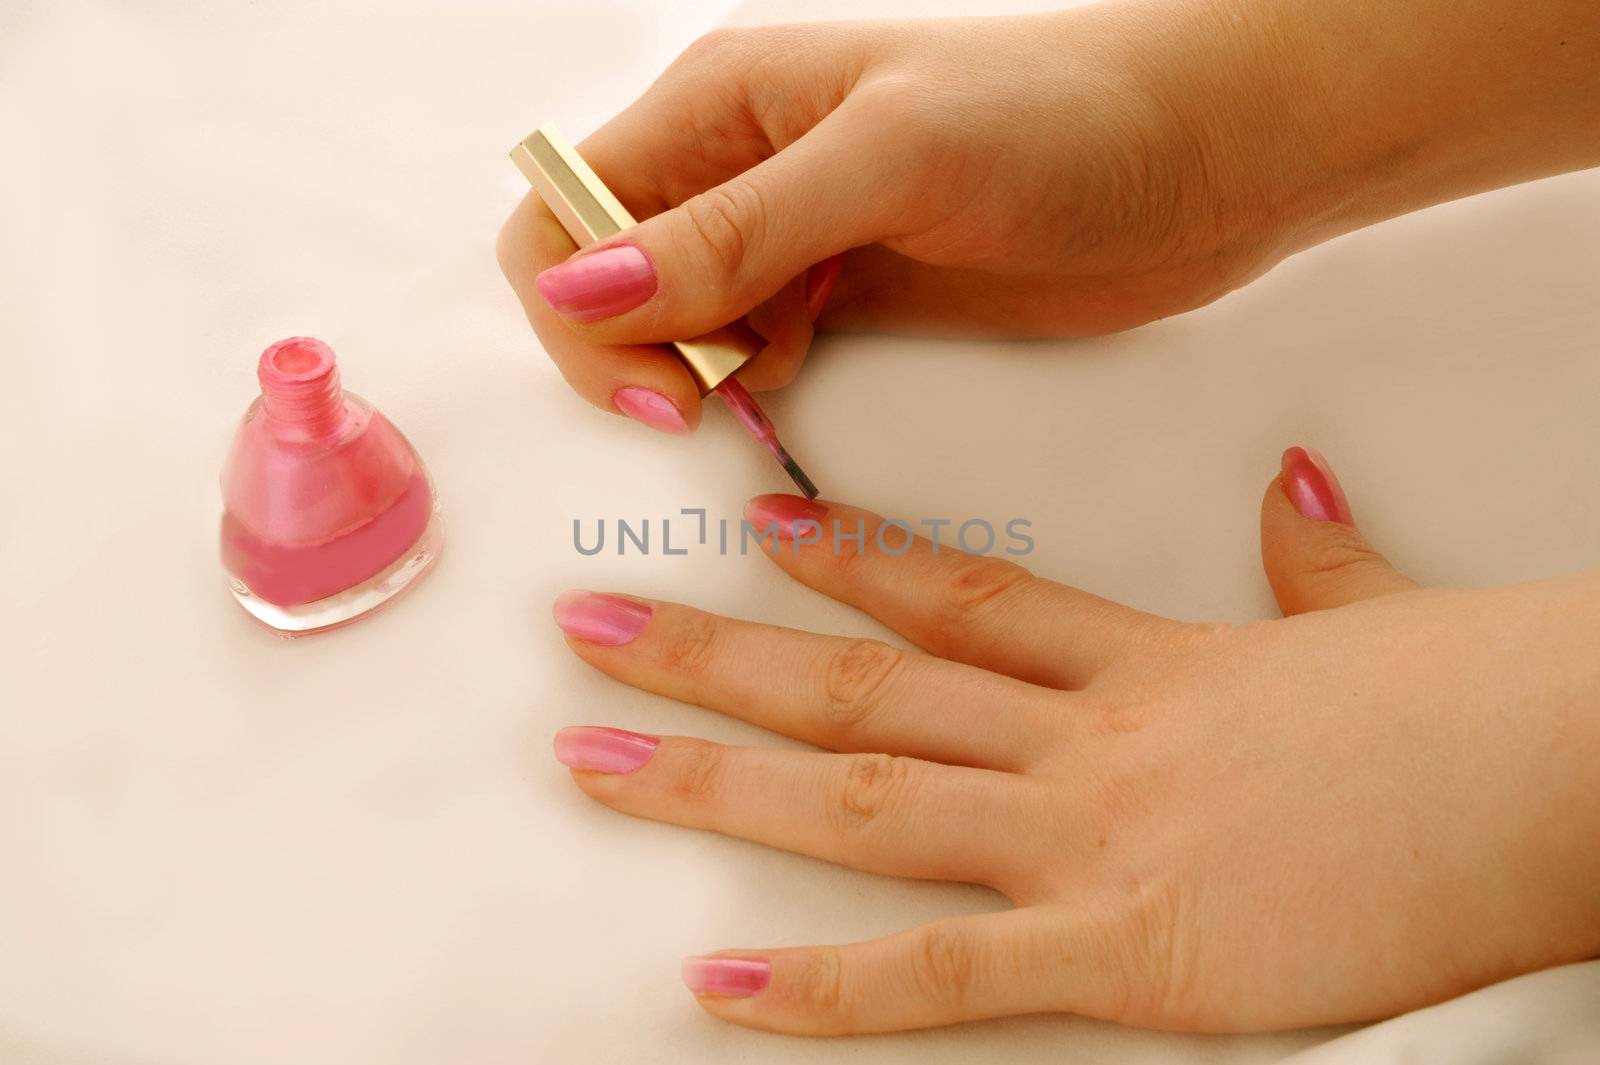 The woman imposes a varnish for manicure on nails